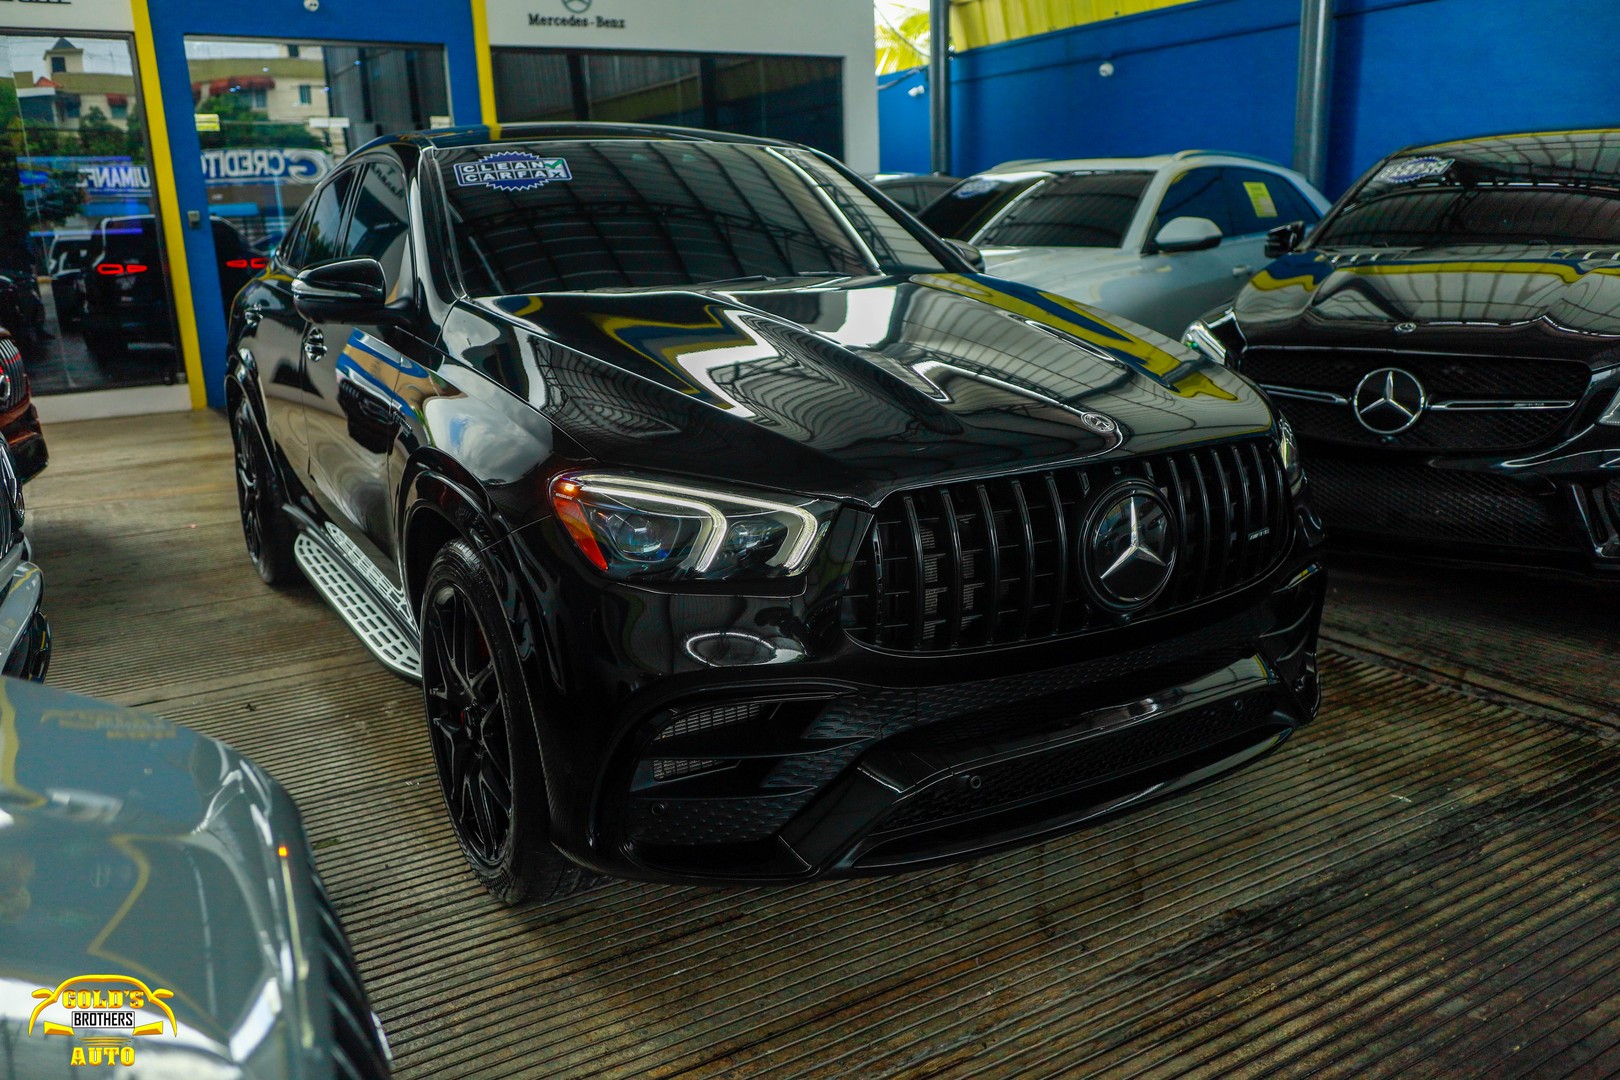 jeepetas y camionetas - Mercedes Benz GLE 63s AMG Coupe 2021 Clean Carfax